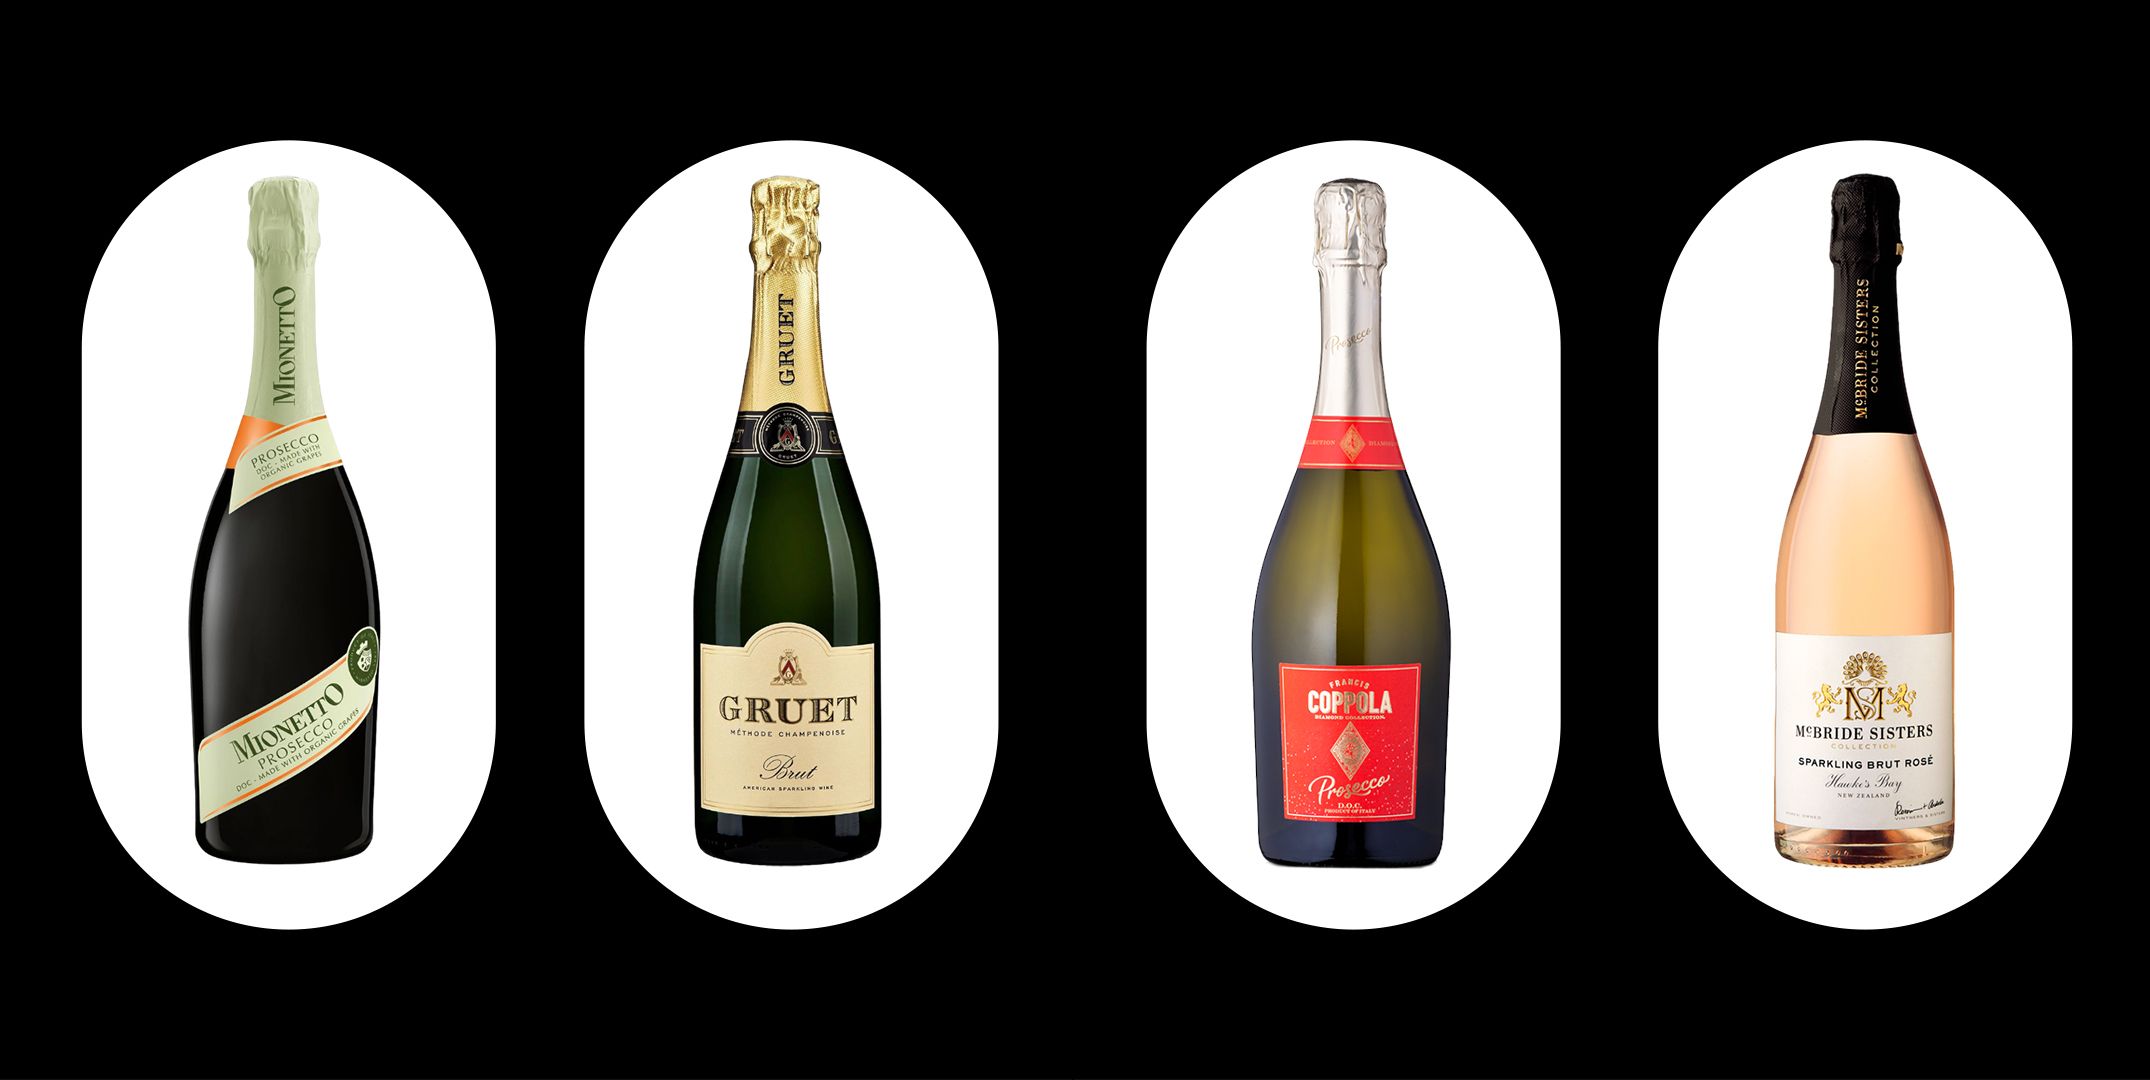 What Is the Best Glass for Drinking Champagne?